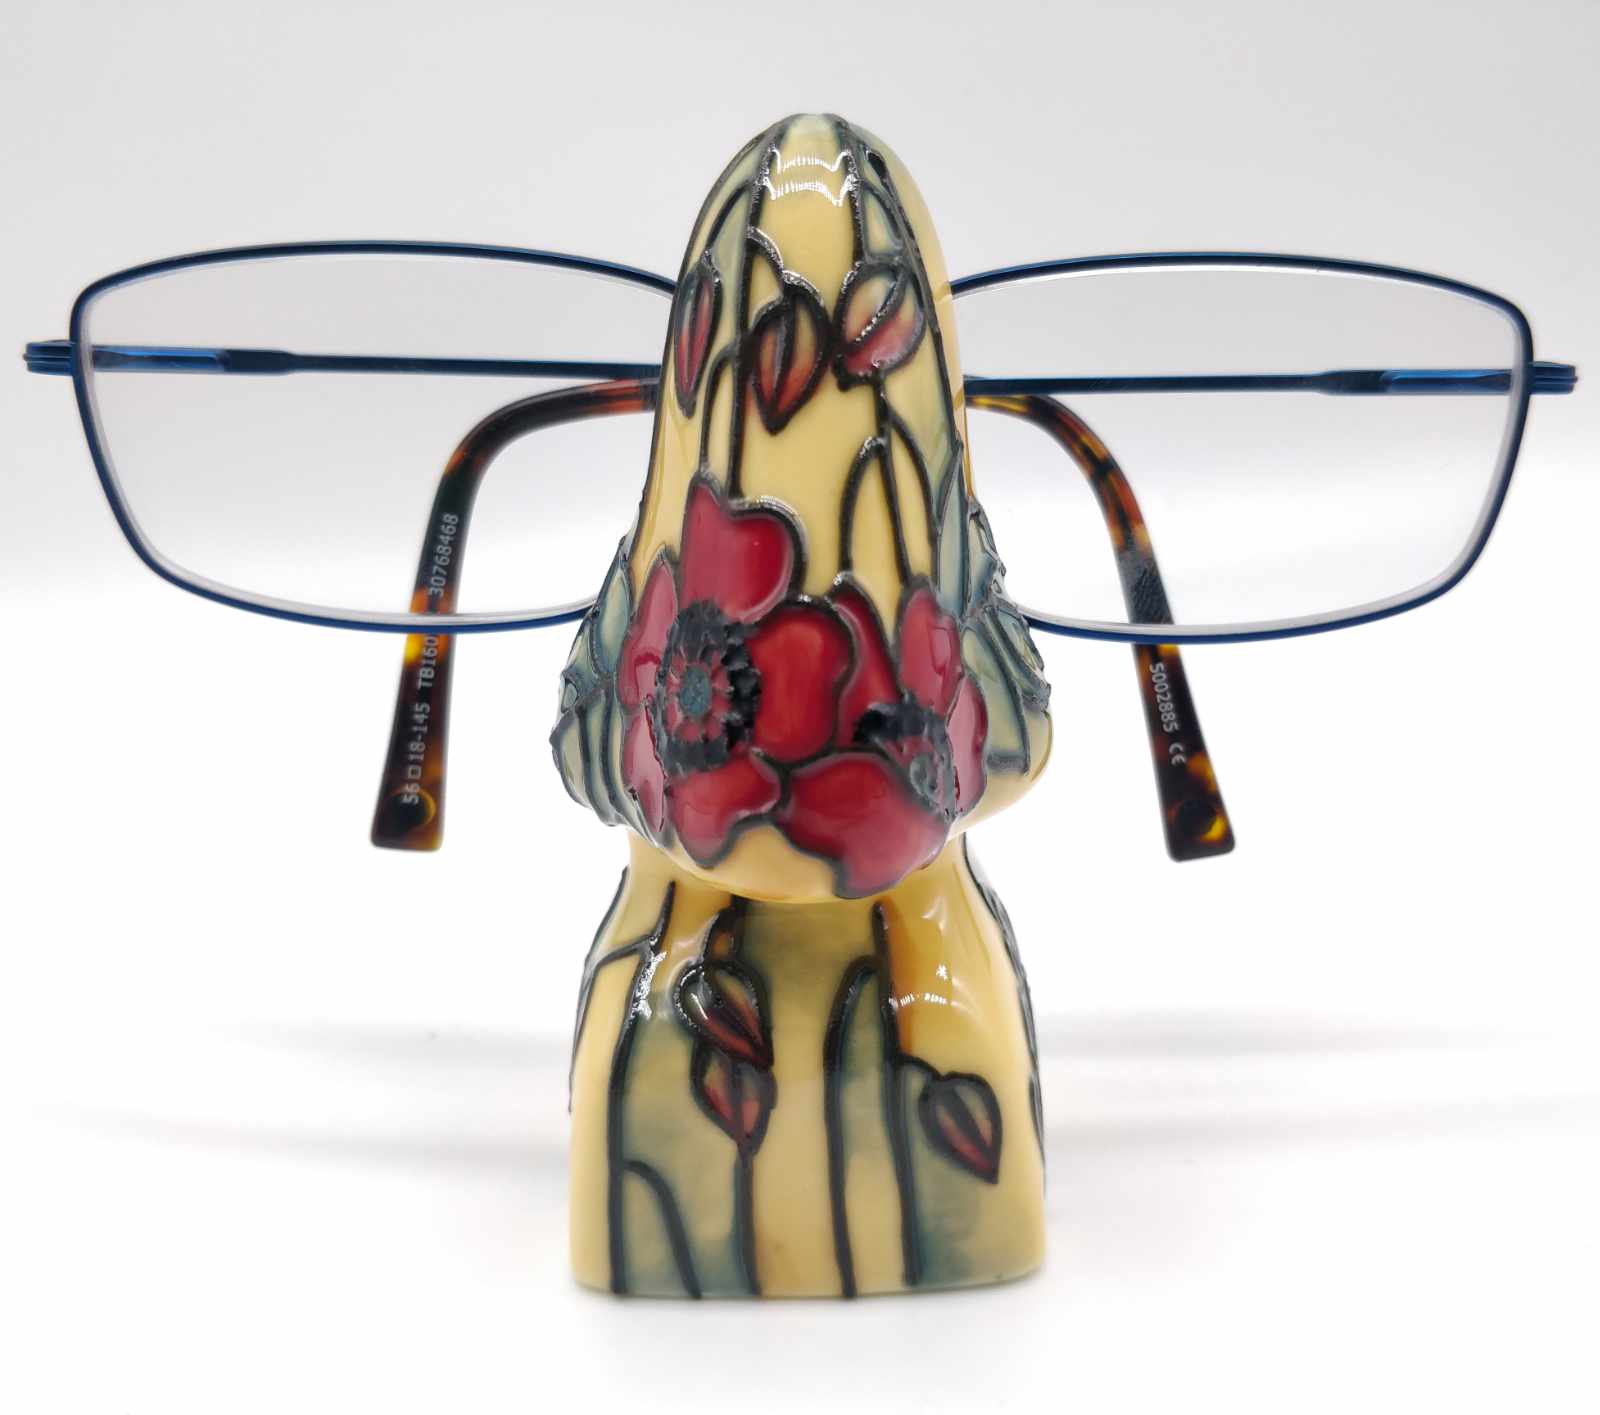 Red poppy and light yellow cream background painted on this eyeglasses holder unique